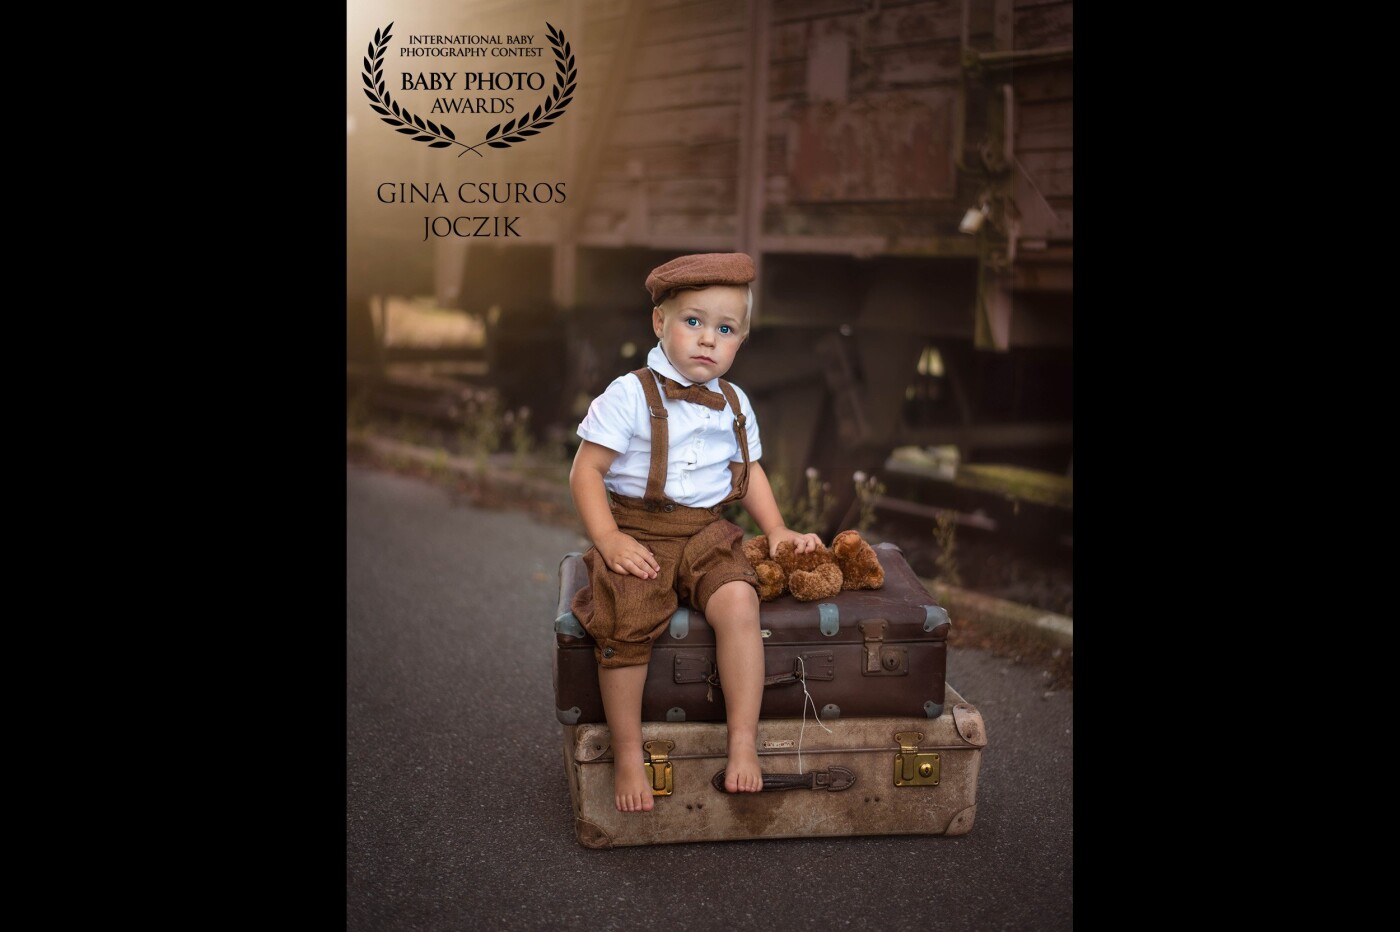 These little explorer boy photos were taken in the old train station. He really enjoyed his session and the sweets what he got after 